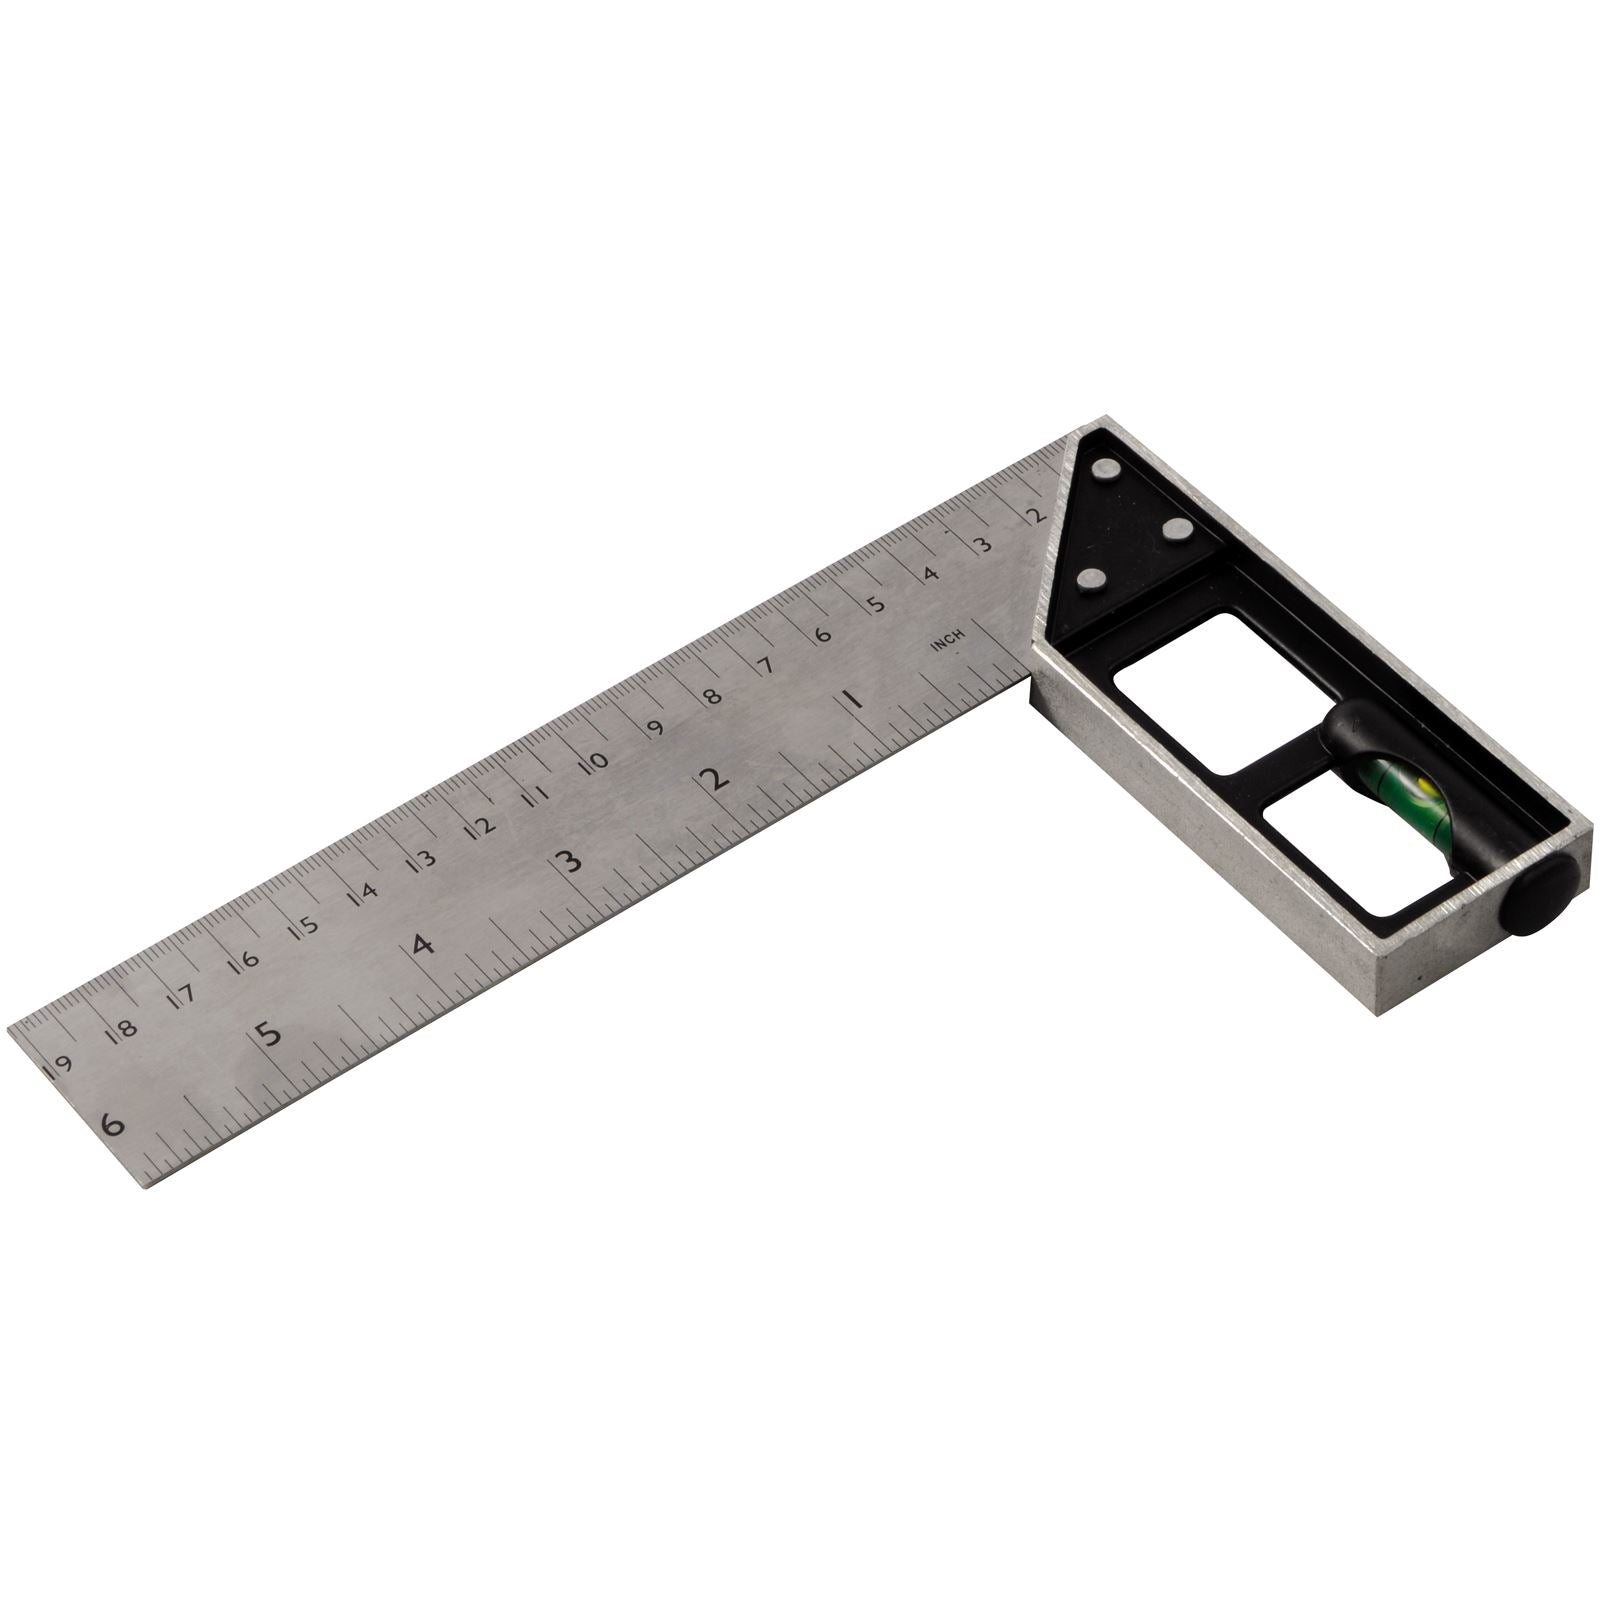 Silverline 150mm Tri & Mitre Square With Spirit Level Imperial Metric Measure